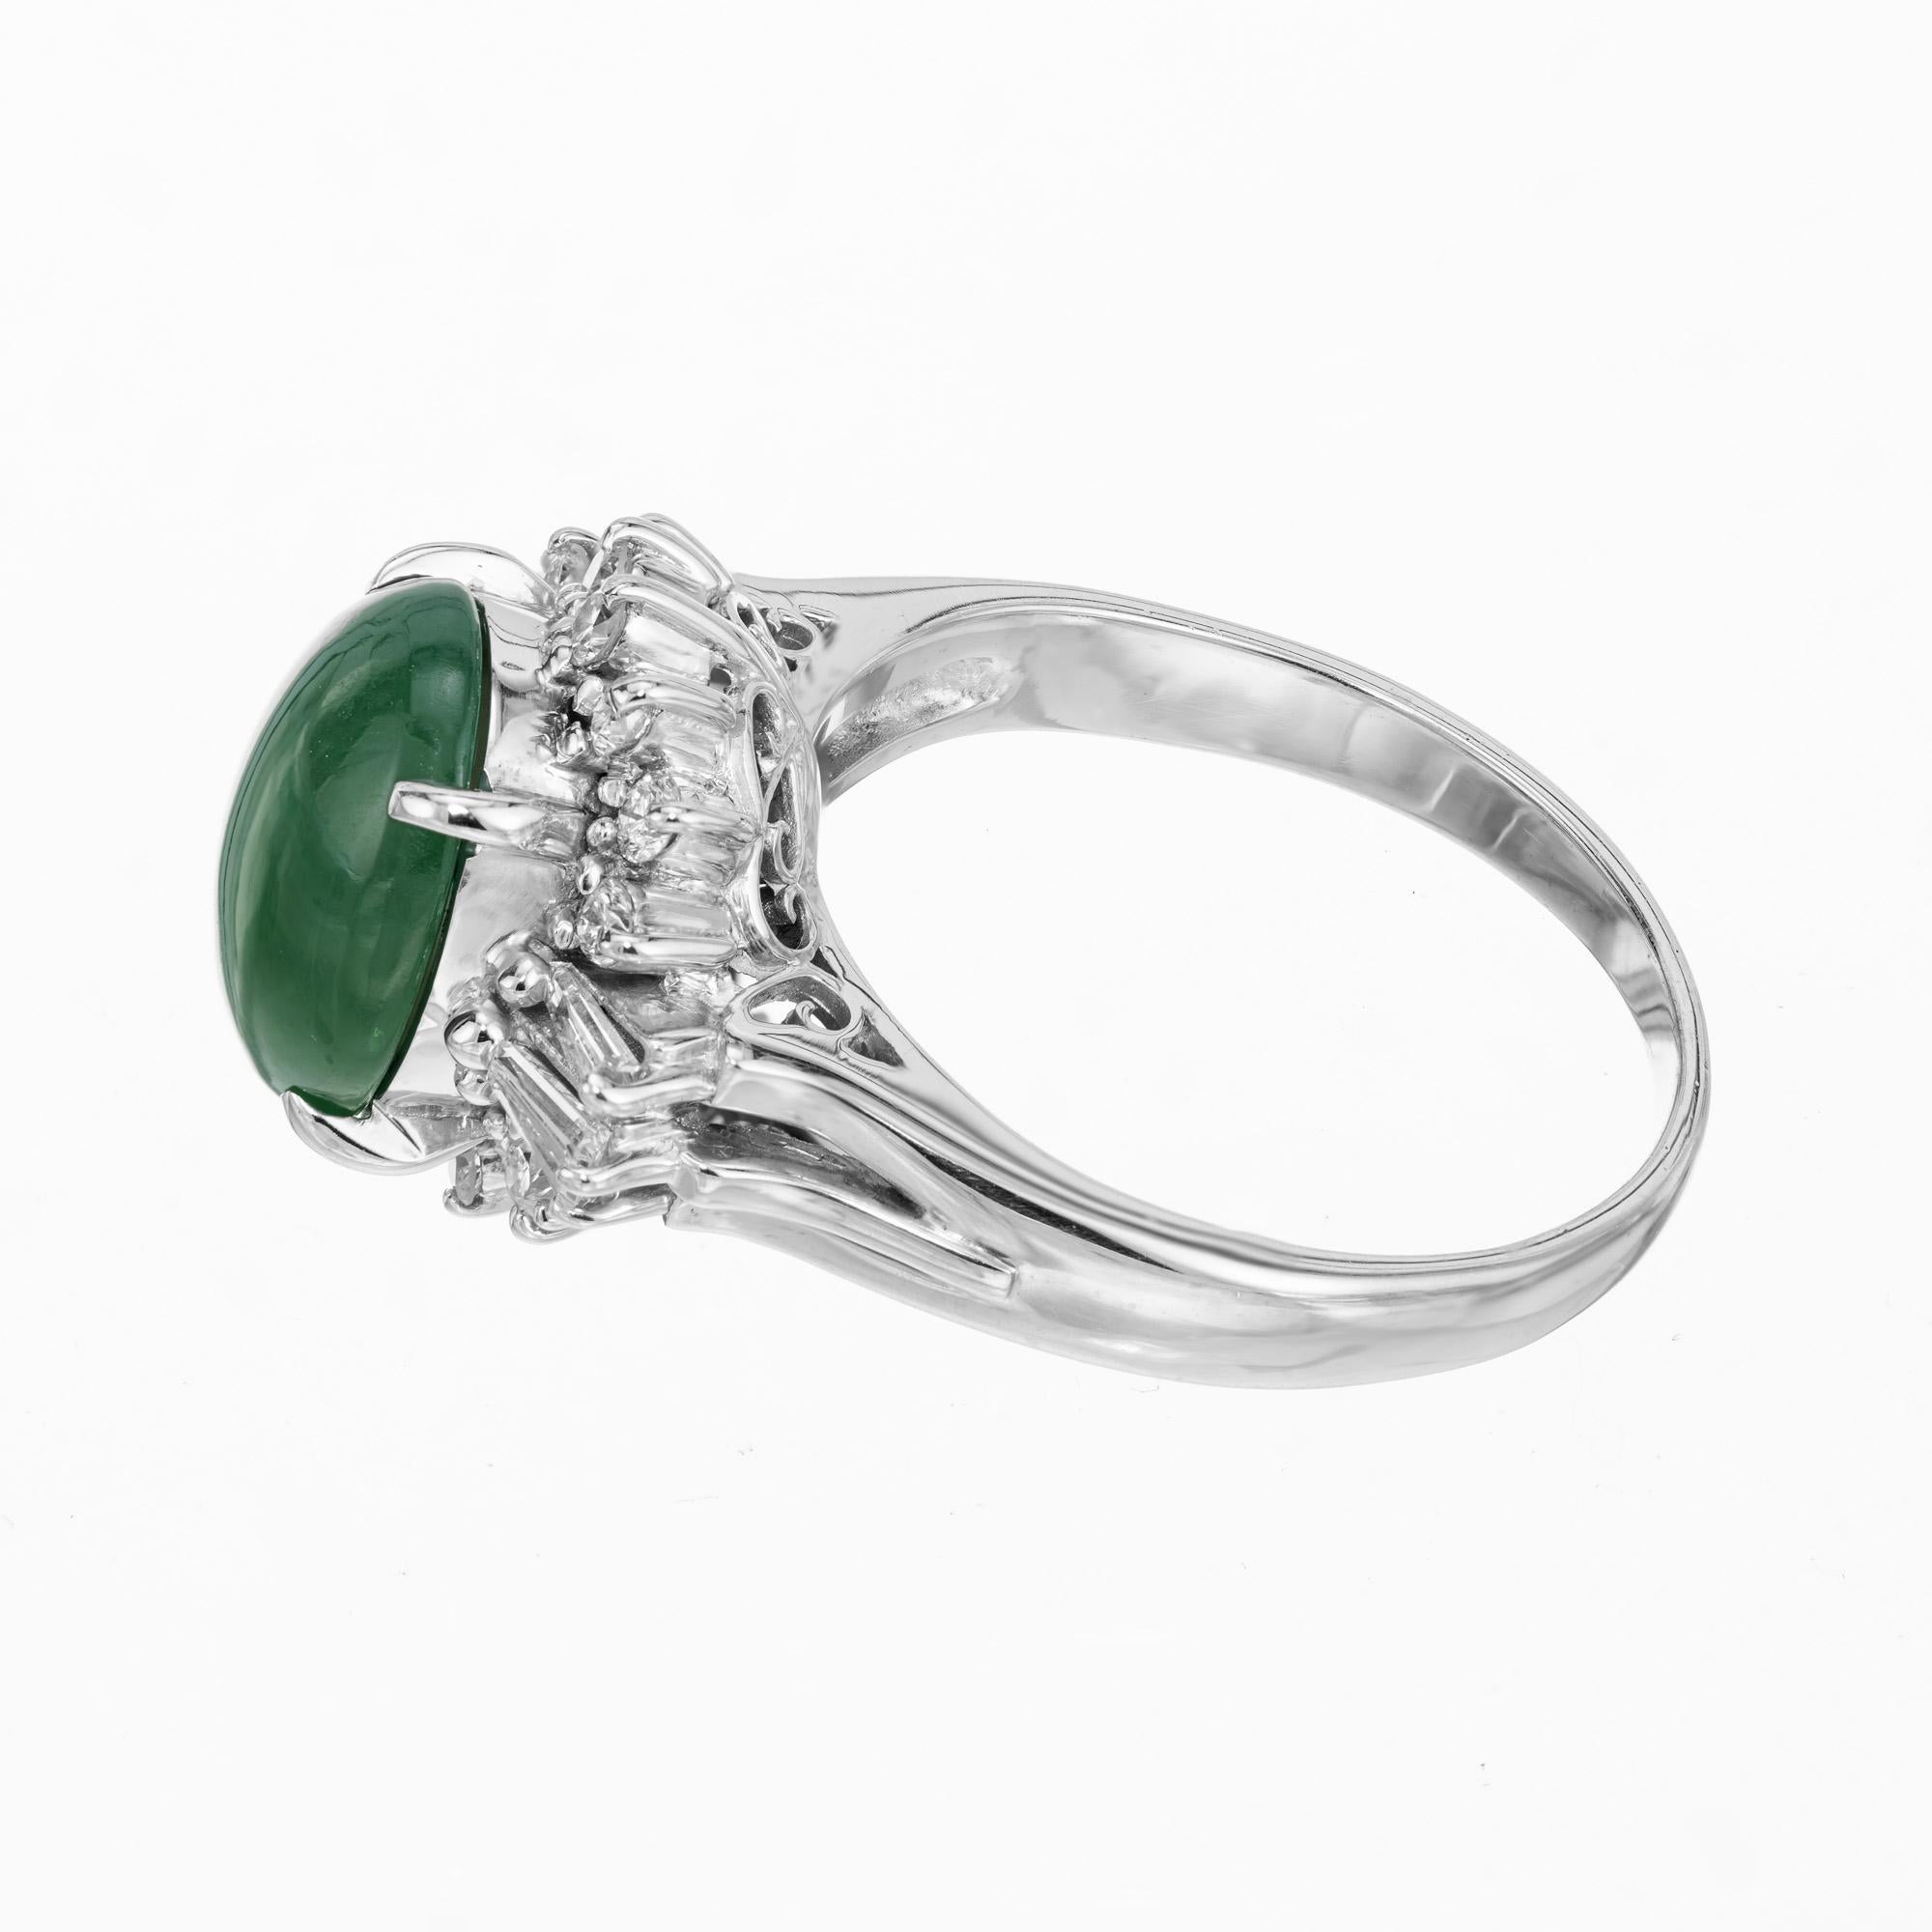 GIA Certified 2.65 Carat Cabochon Omphacite Jade Diamond Halo Platinum Ring  In Good Condition For Sale In Stamford, CT